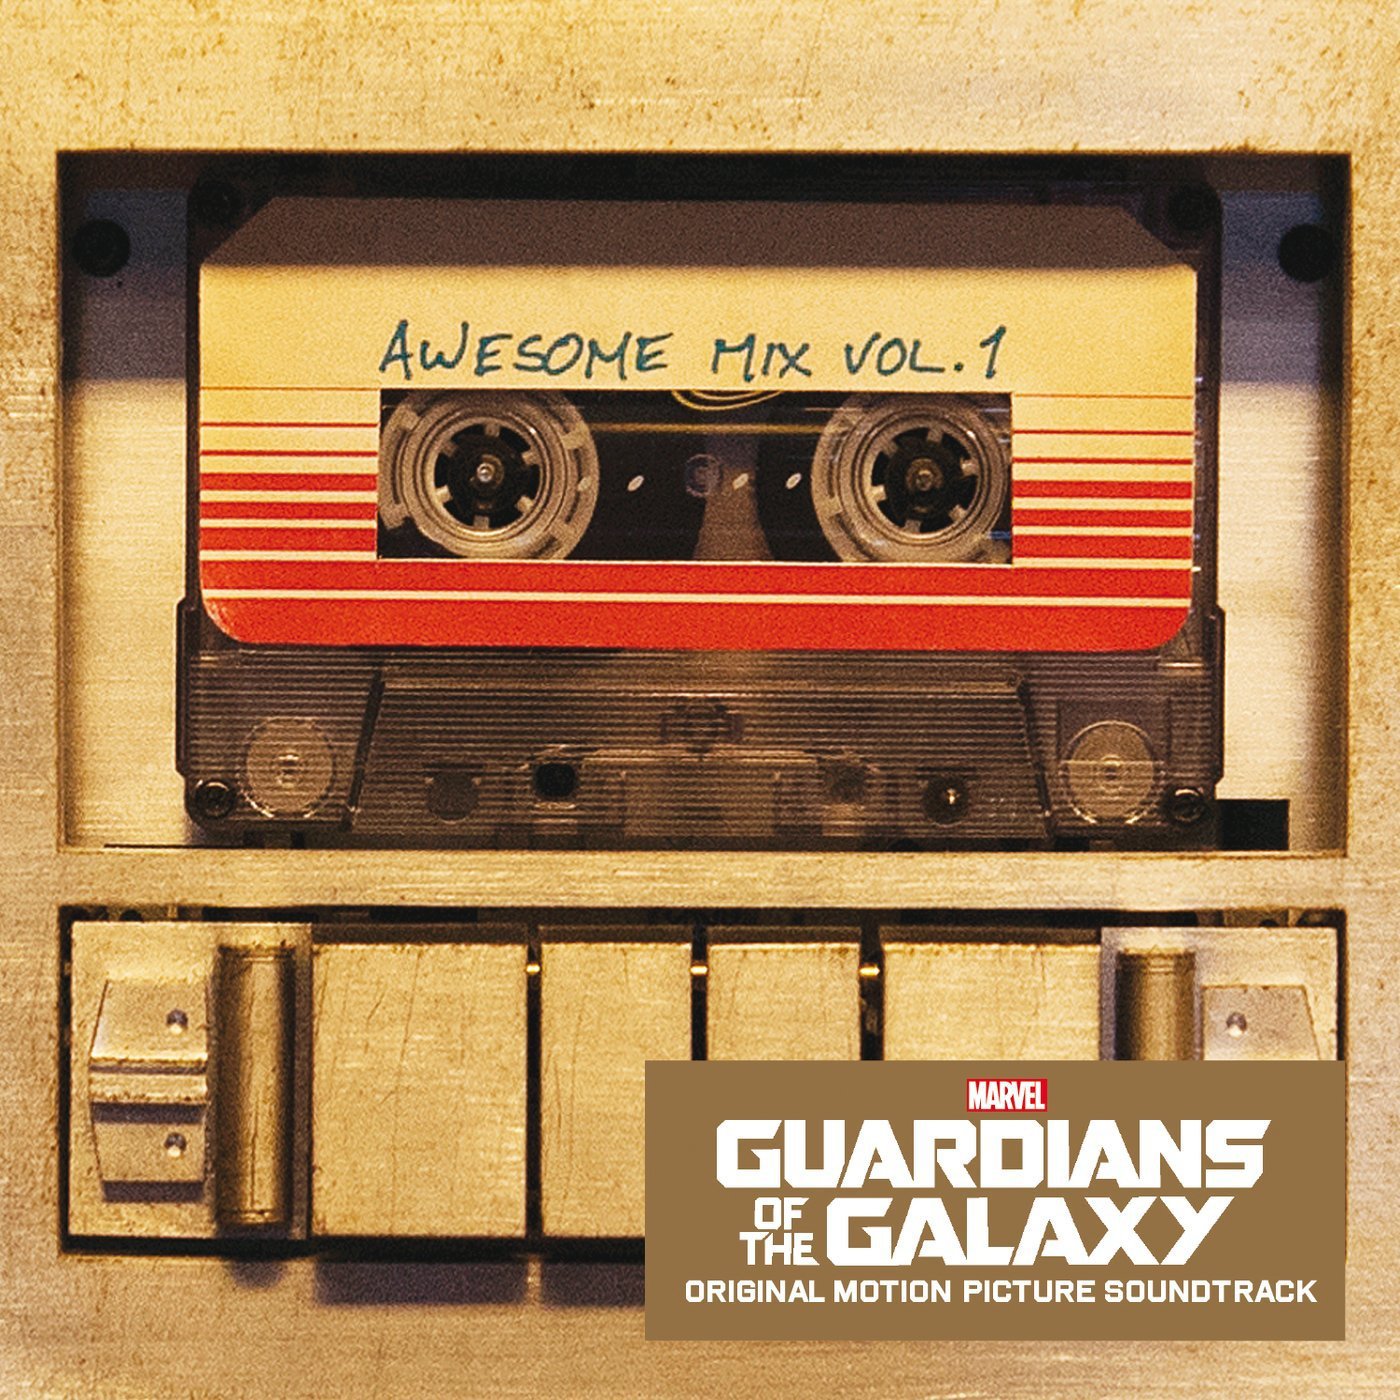 GUARDIANS OF THE GALAXY AWESOME MIX VOL 1 BY VARIOUS ARTISTS